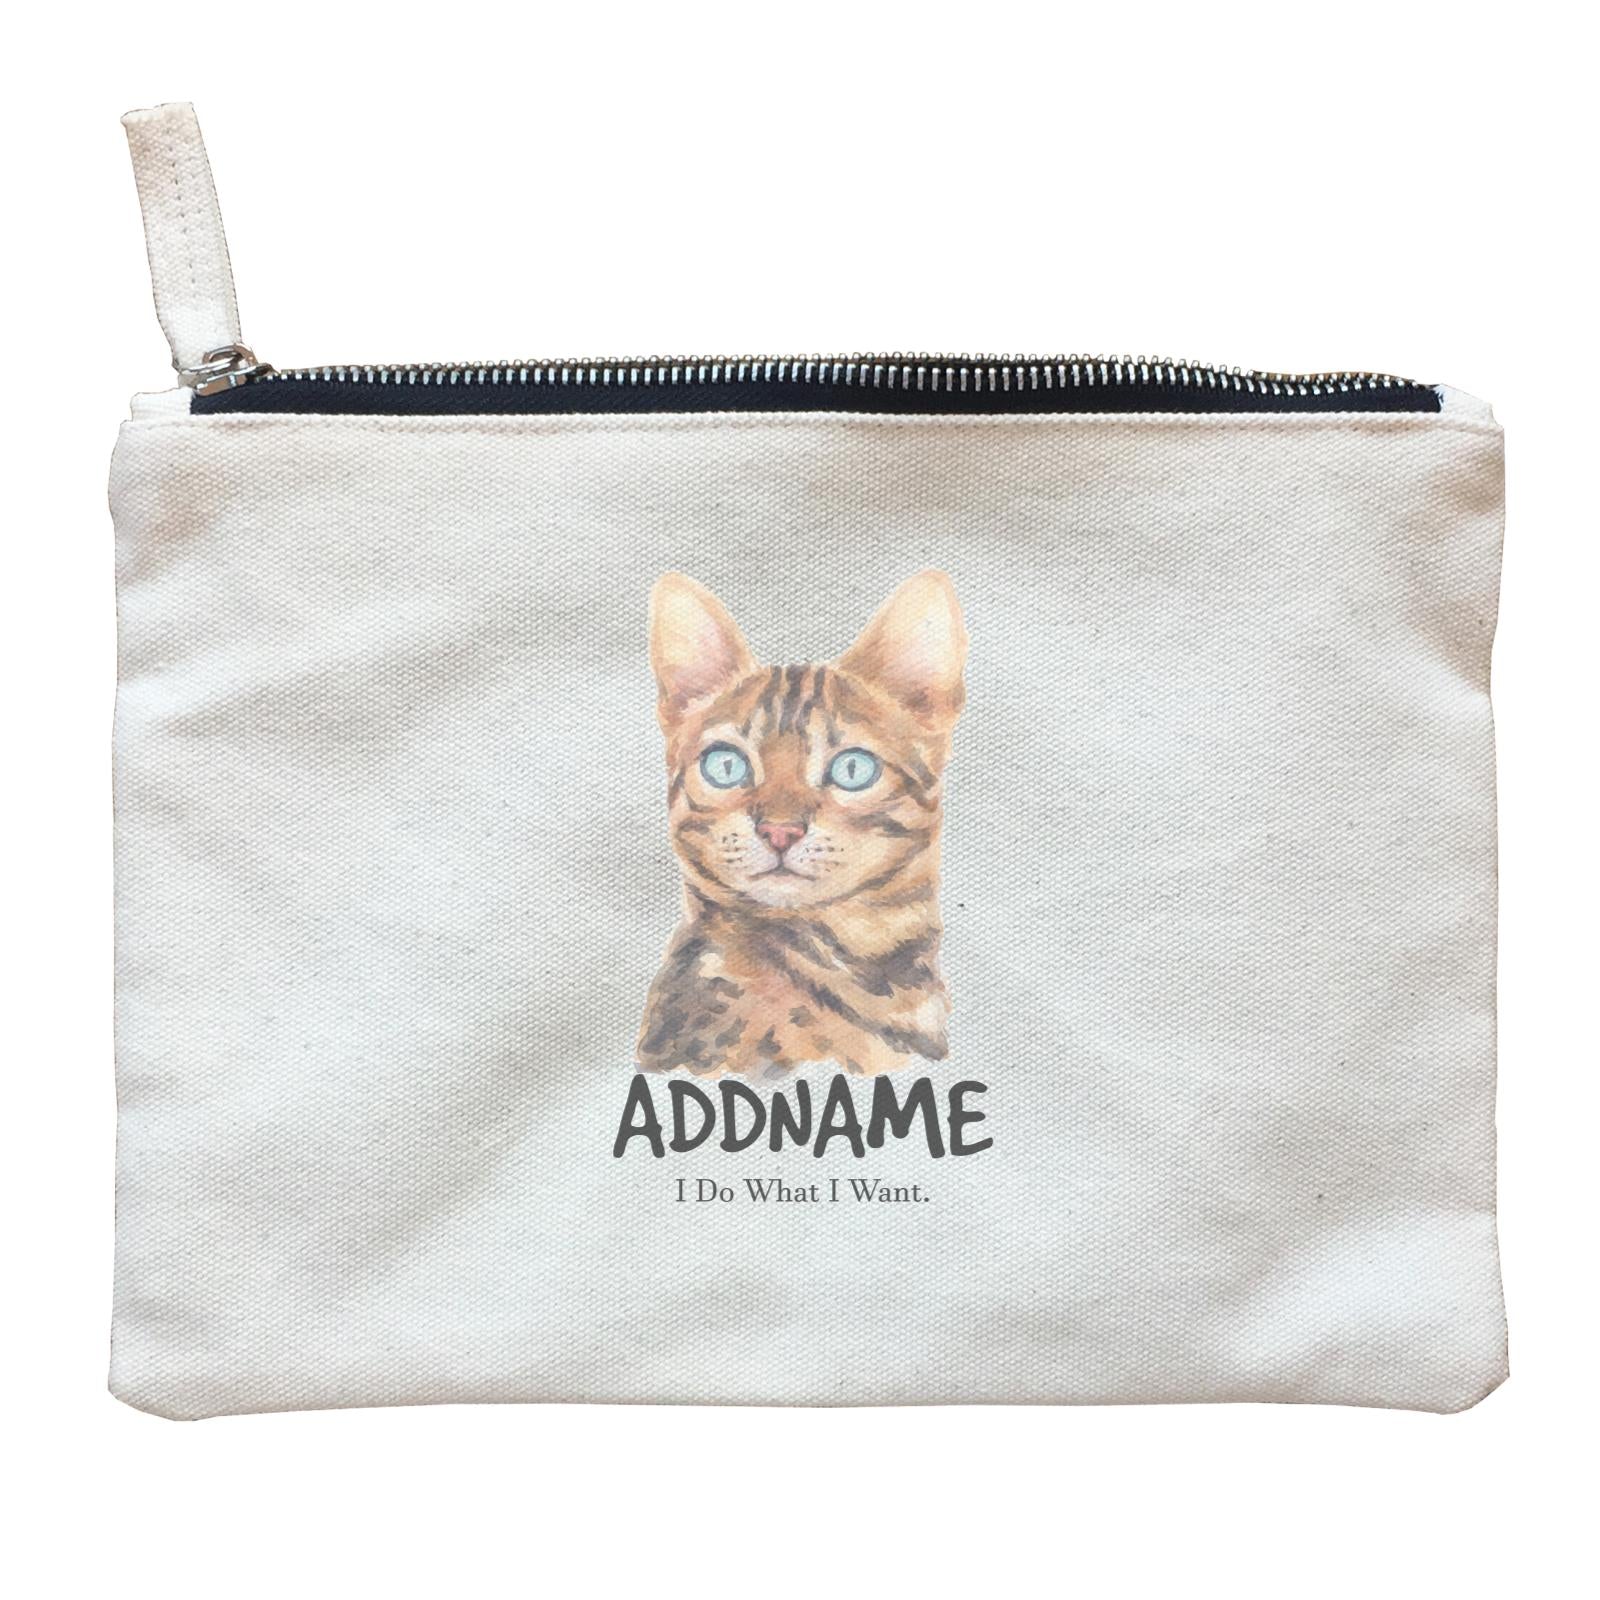 Watercolor Cat Bengal Cat I Do What I Want Addname Zipper Pouch